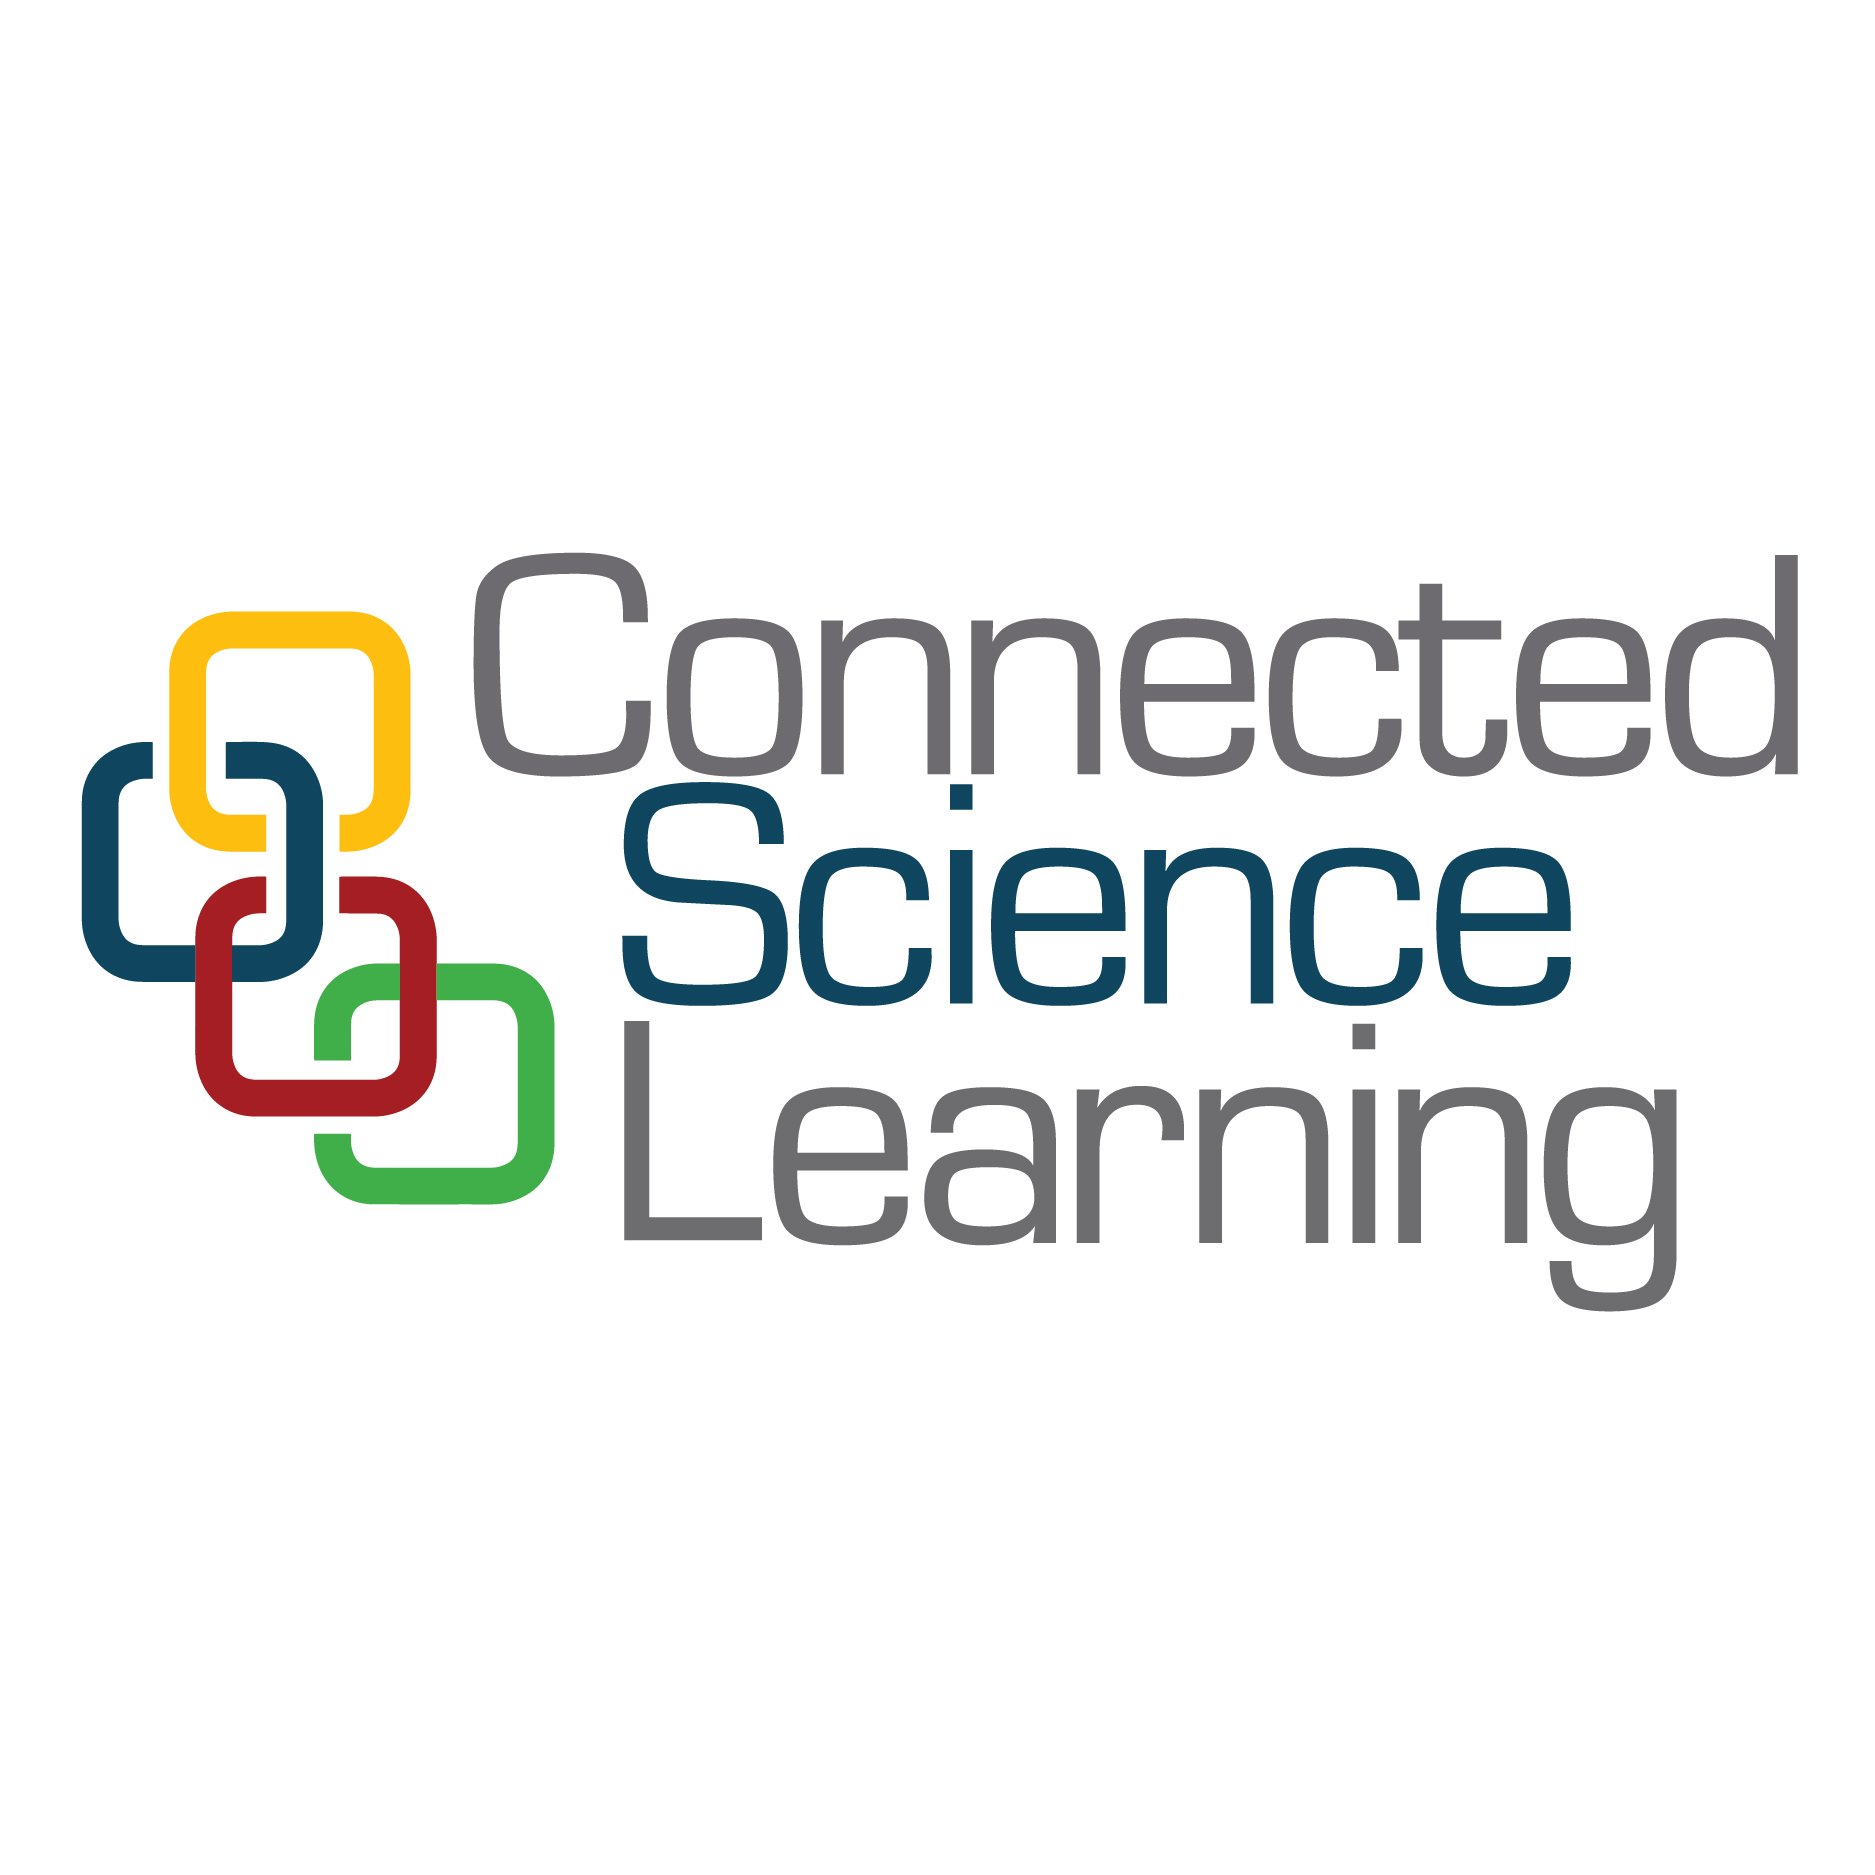 Connected Science Learning is a peer-reviewed journal linking in-school and out-of-school STEM learning. A publication of @NSTA and @ScienceCenters.